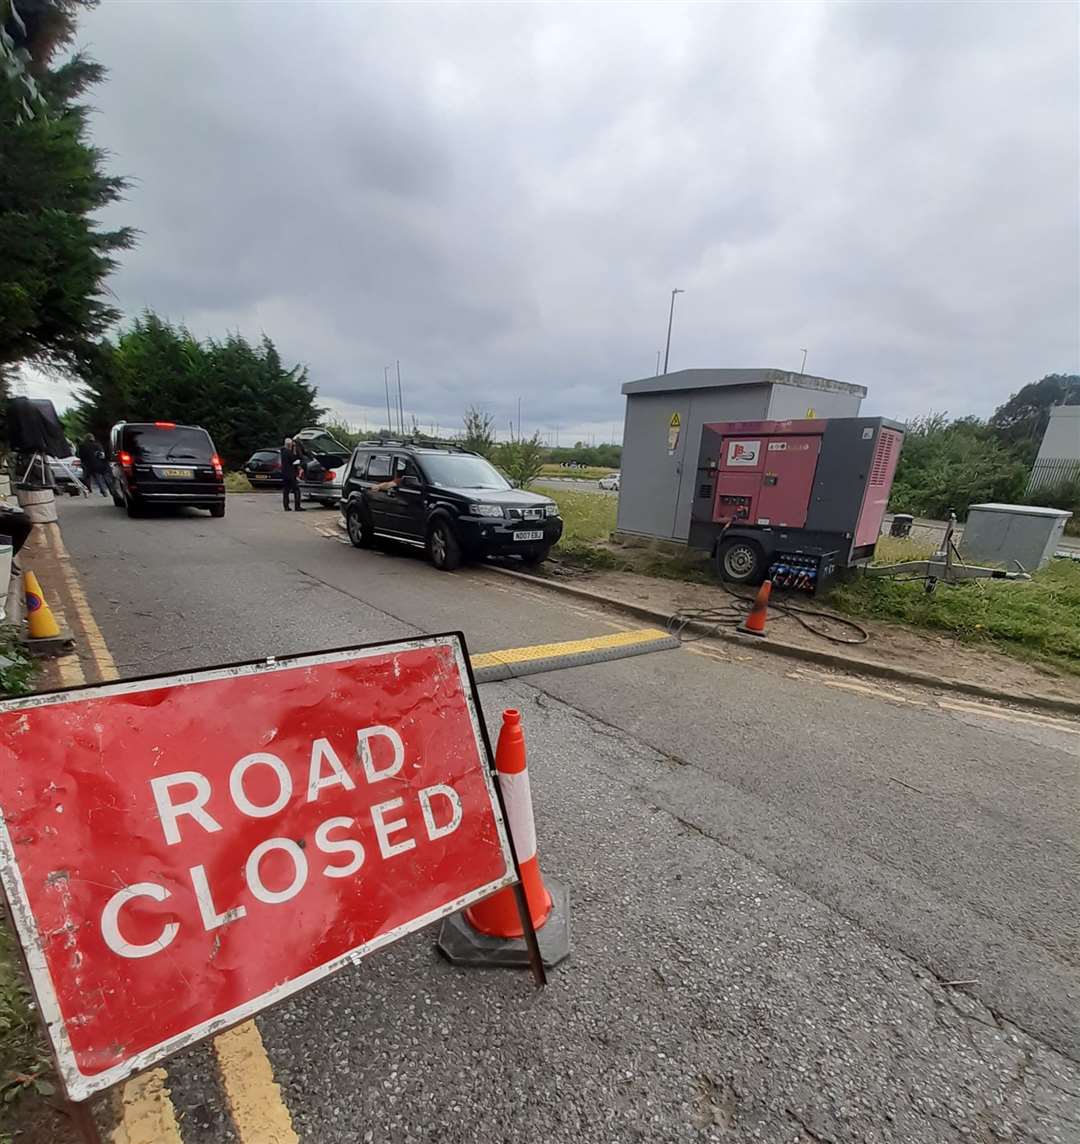 A road closure is currently in place on the entrance to Nell's Cafe in Gravesend